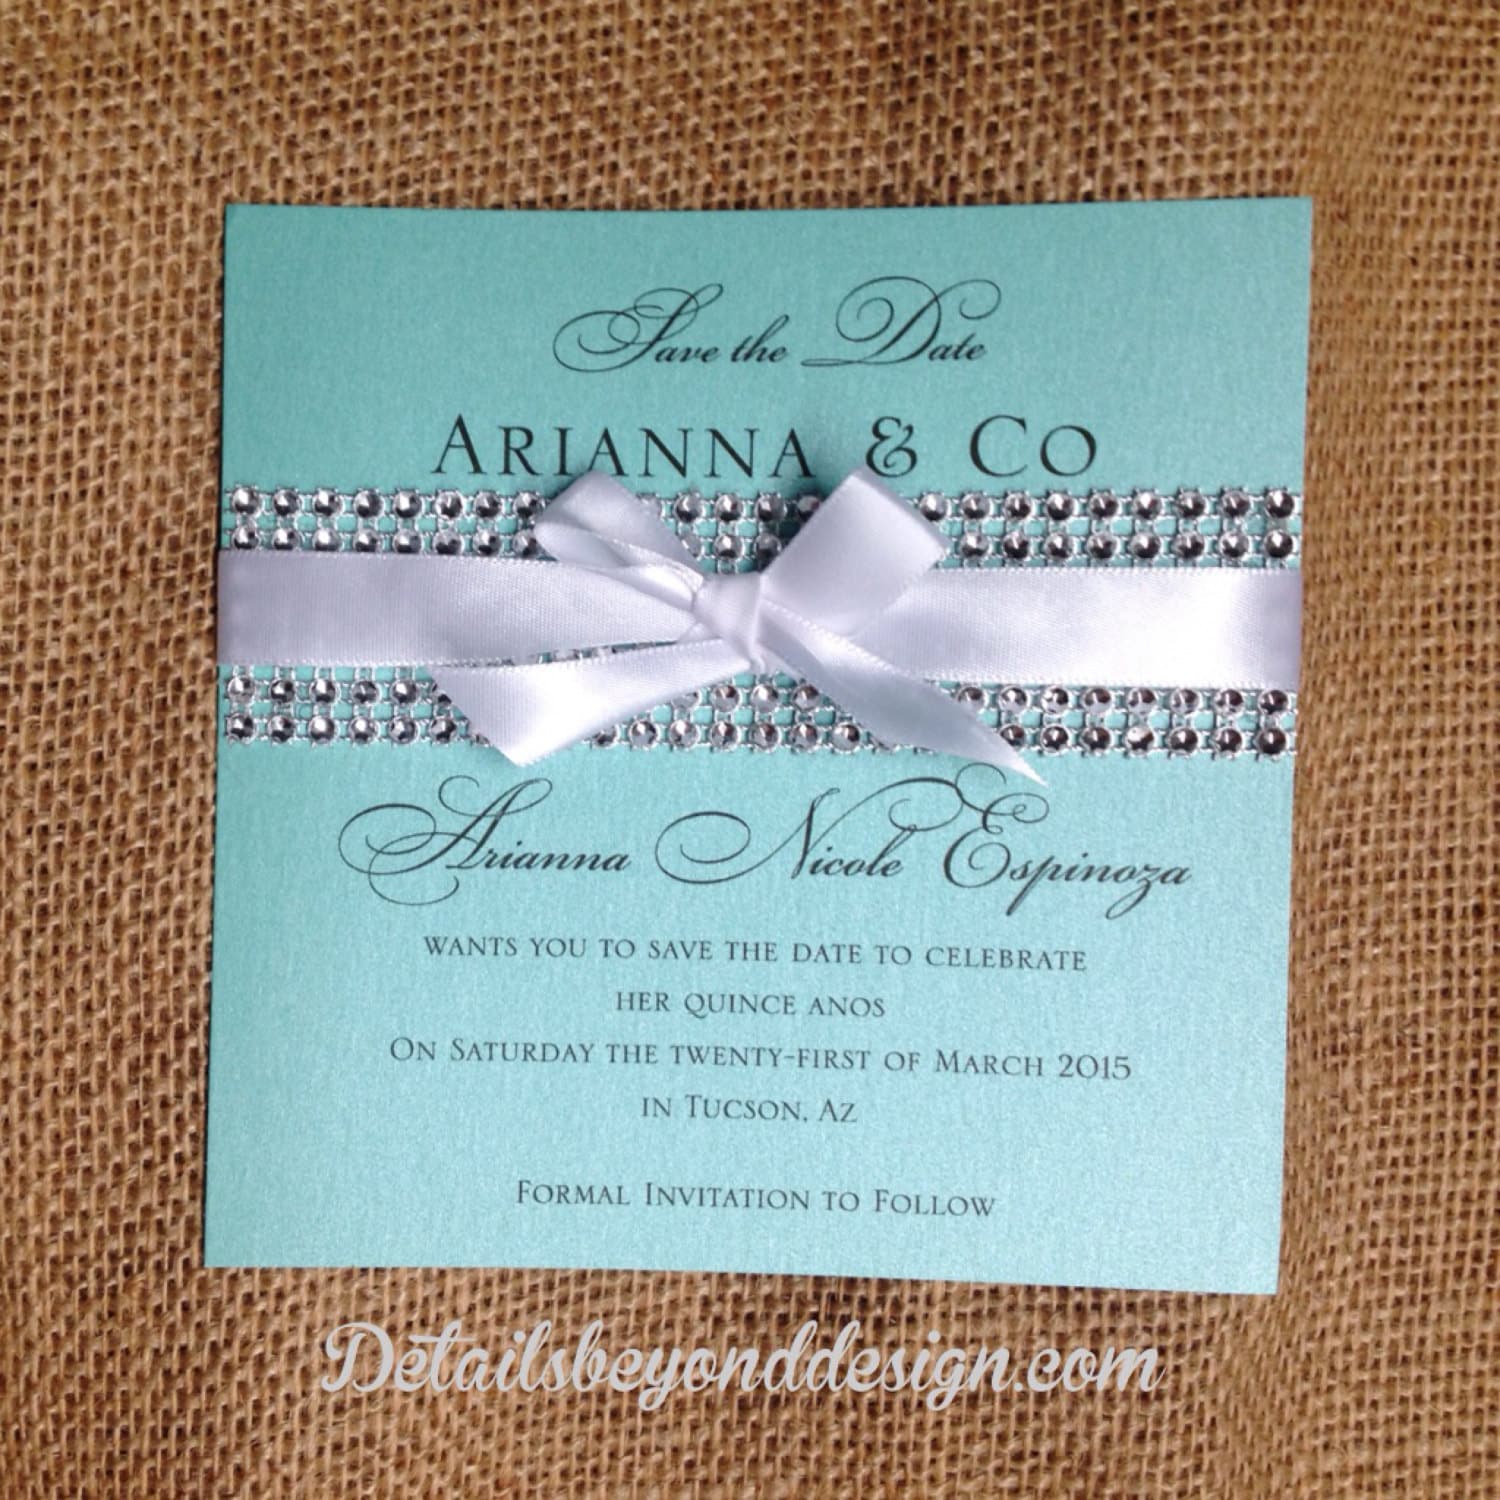 Tiffany Box Bling Save The Date On Tiffany Blue Pearlescent Card Stock Onepaperheart Stationary Invitations